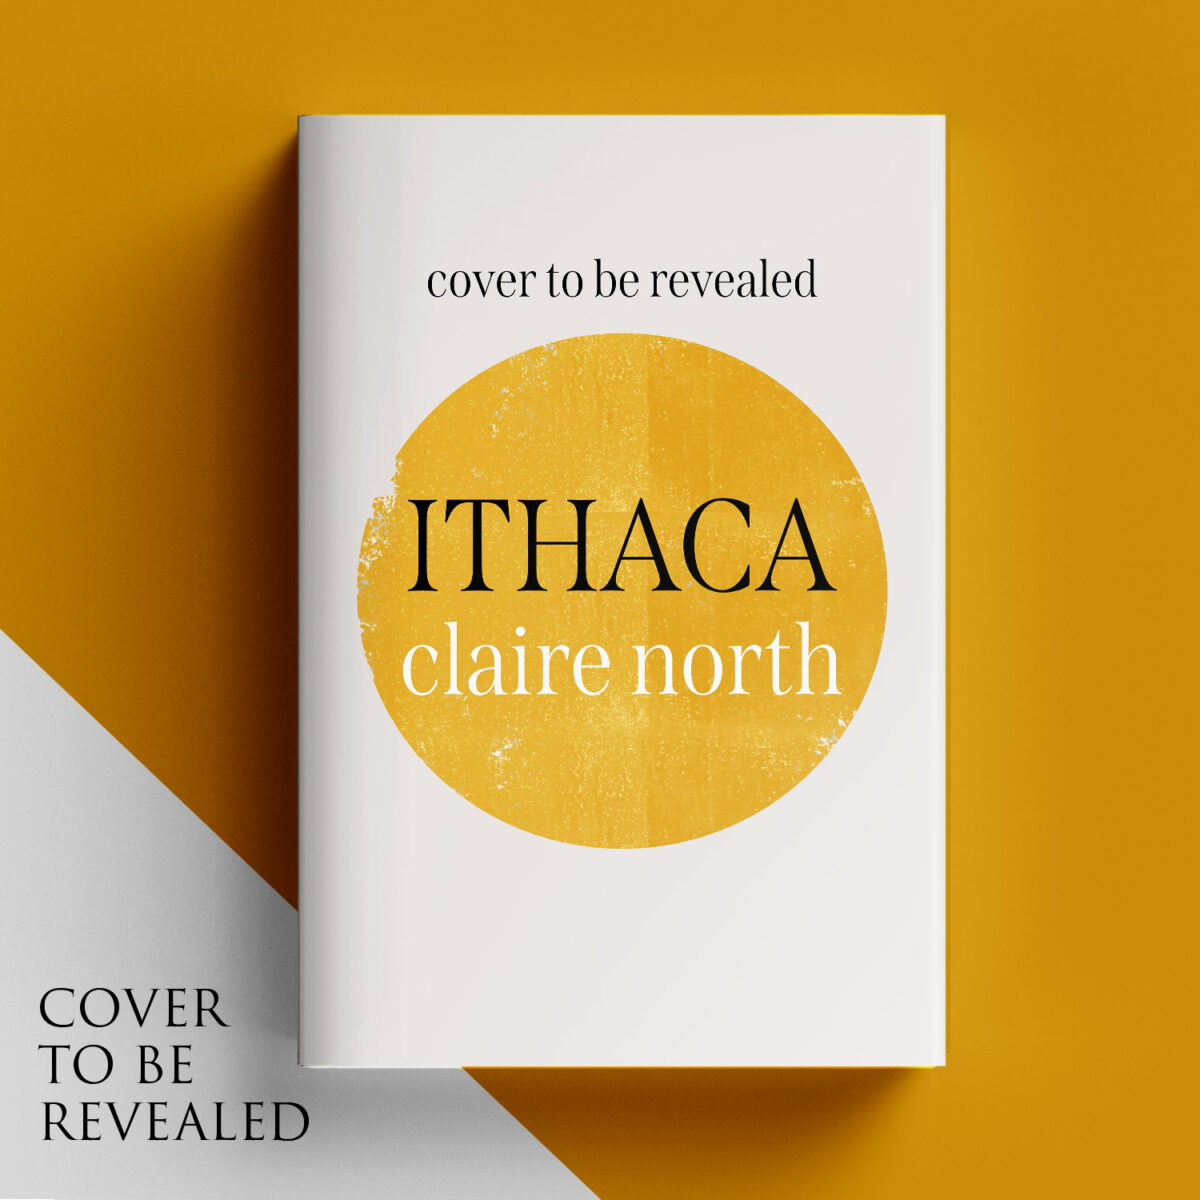 ithaca claire north reviews